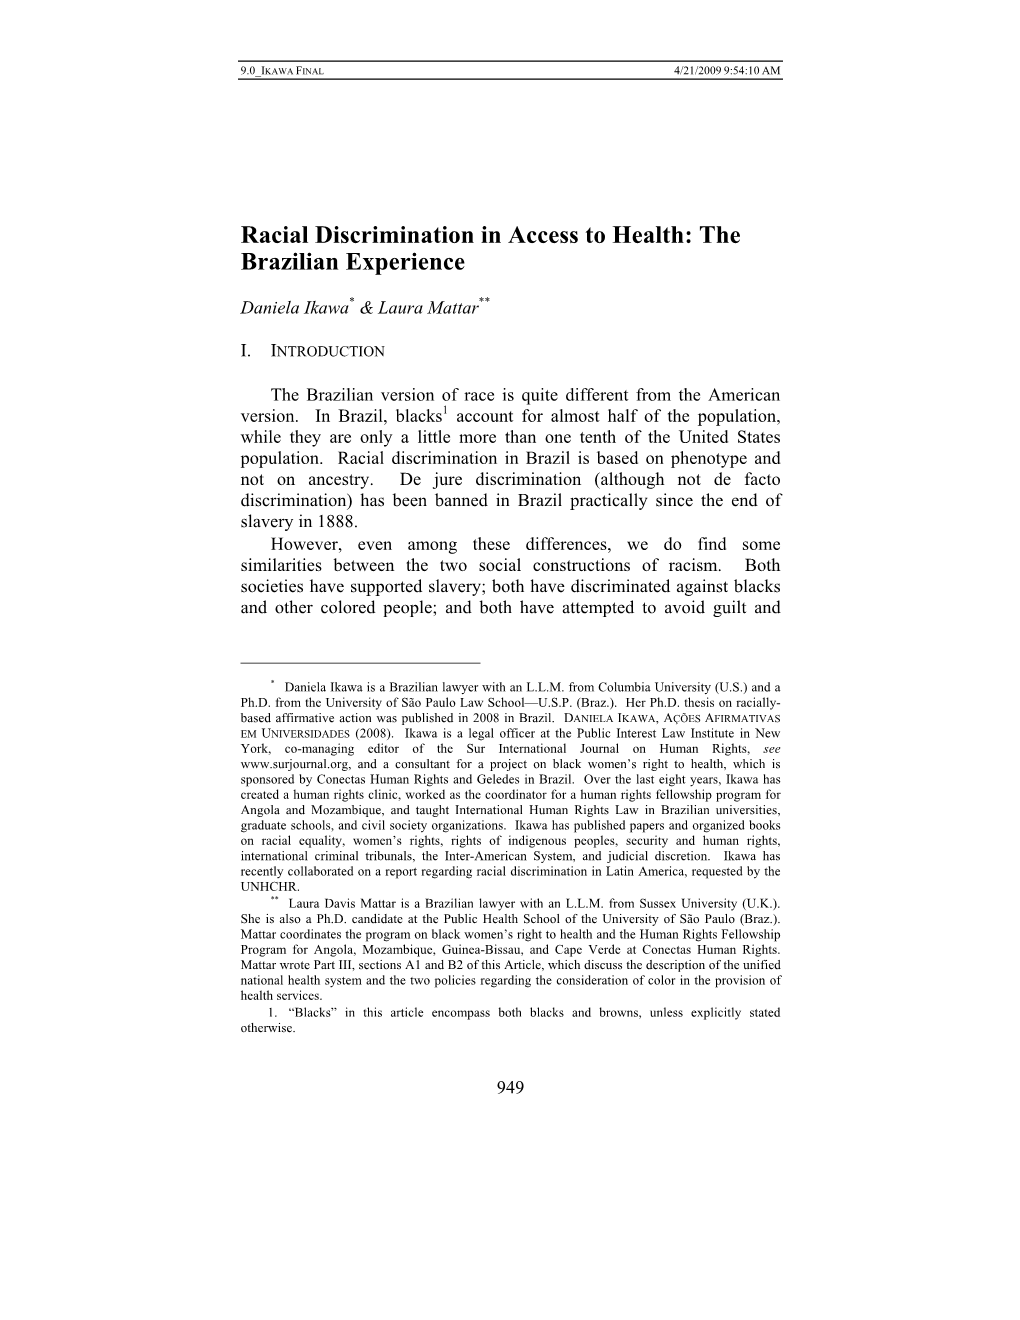 Racial Discrimination in Access to Health: the Brazilian Experience